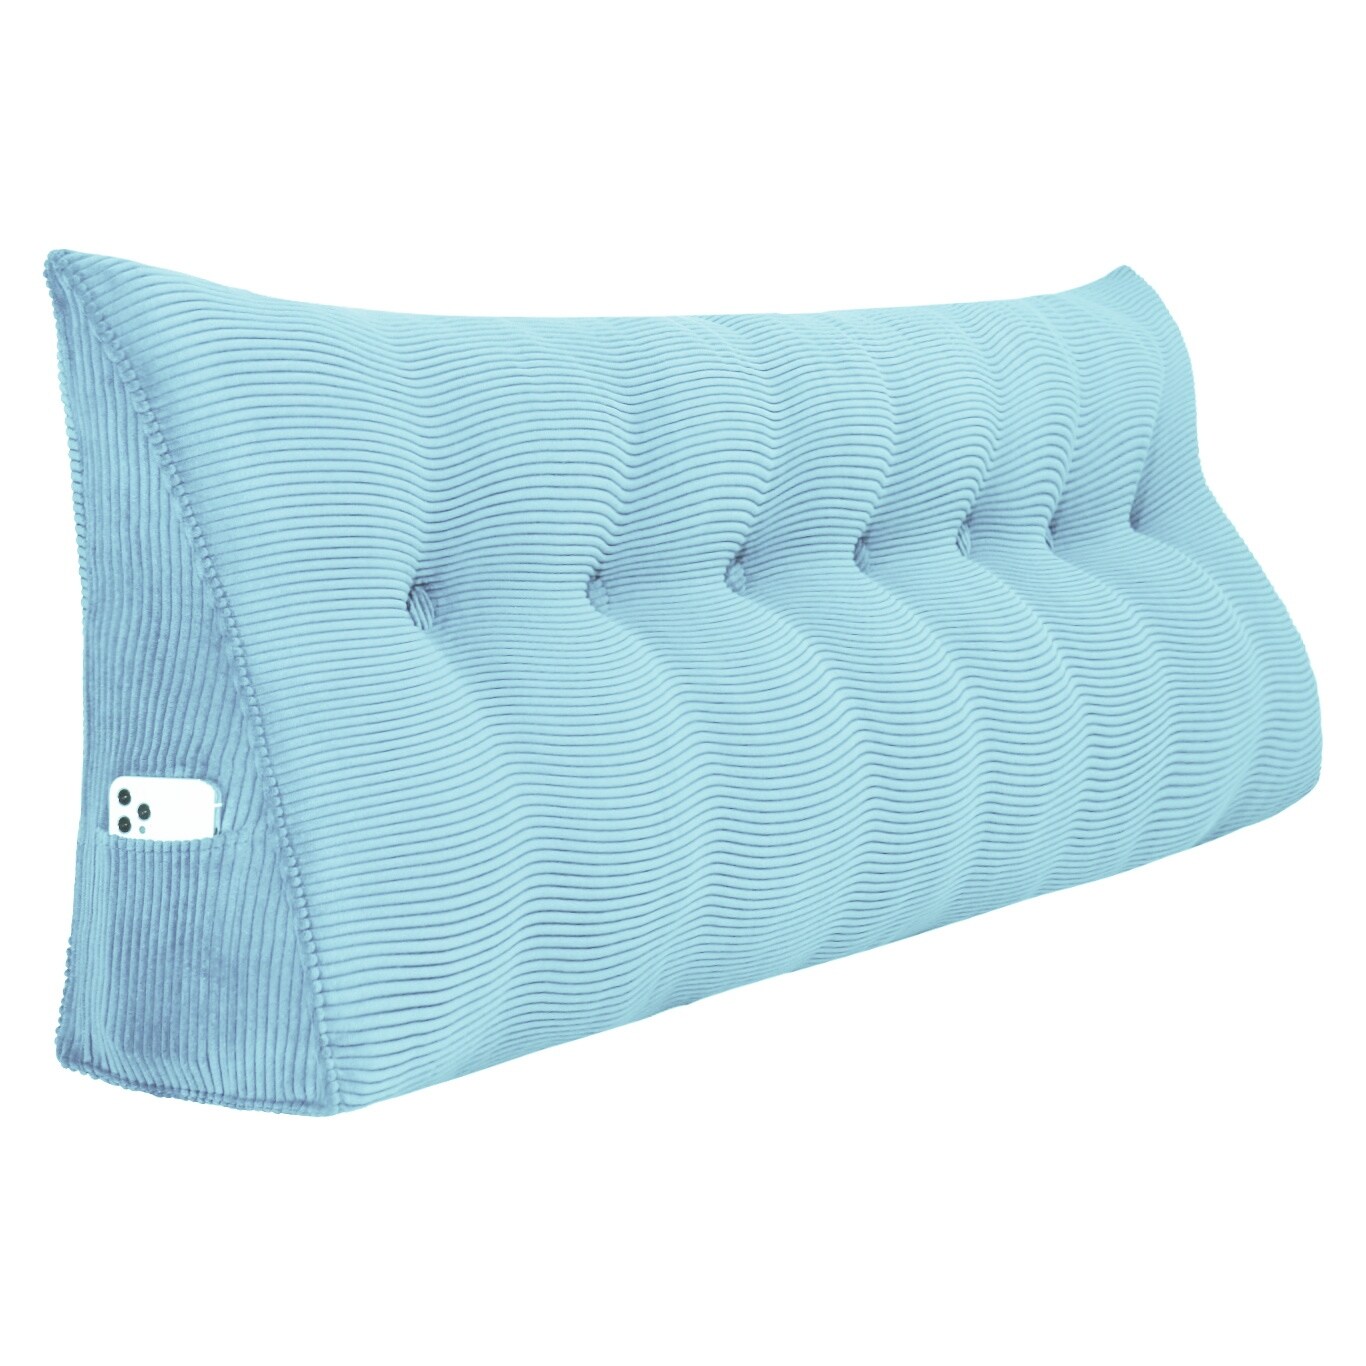 https://ak1.ostkcdn.com/images/products/is/images/direct/a11639b151e234418ce57303ee88843a5f65eed1/WOWMAX-Bed-Rest-Headboard-Reading-Wedge-Back-Support-Pillow.jpg